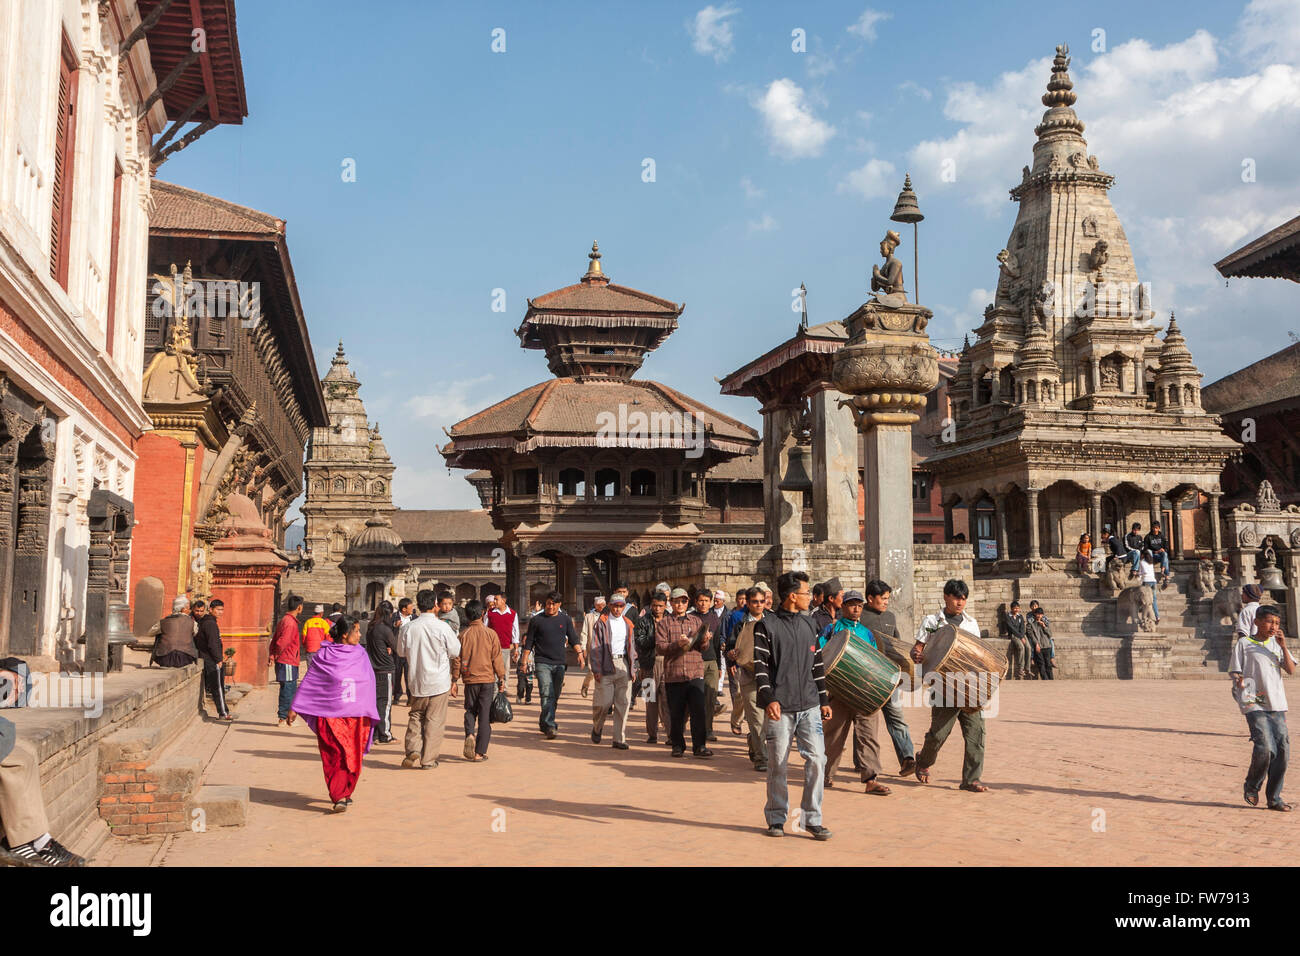 Bhaktapur, Nepal.   Vatsala Durga Temple on right.  The temple was completely destroyed in the earthquake of April 2015. Stock Photo